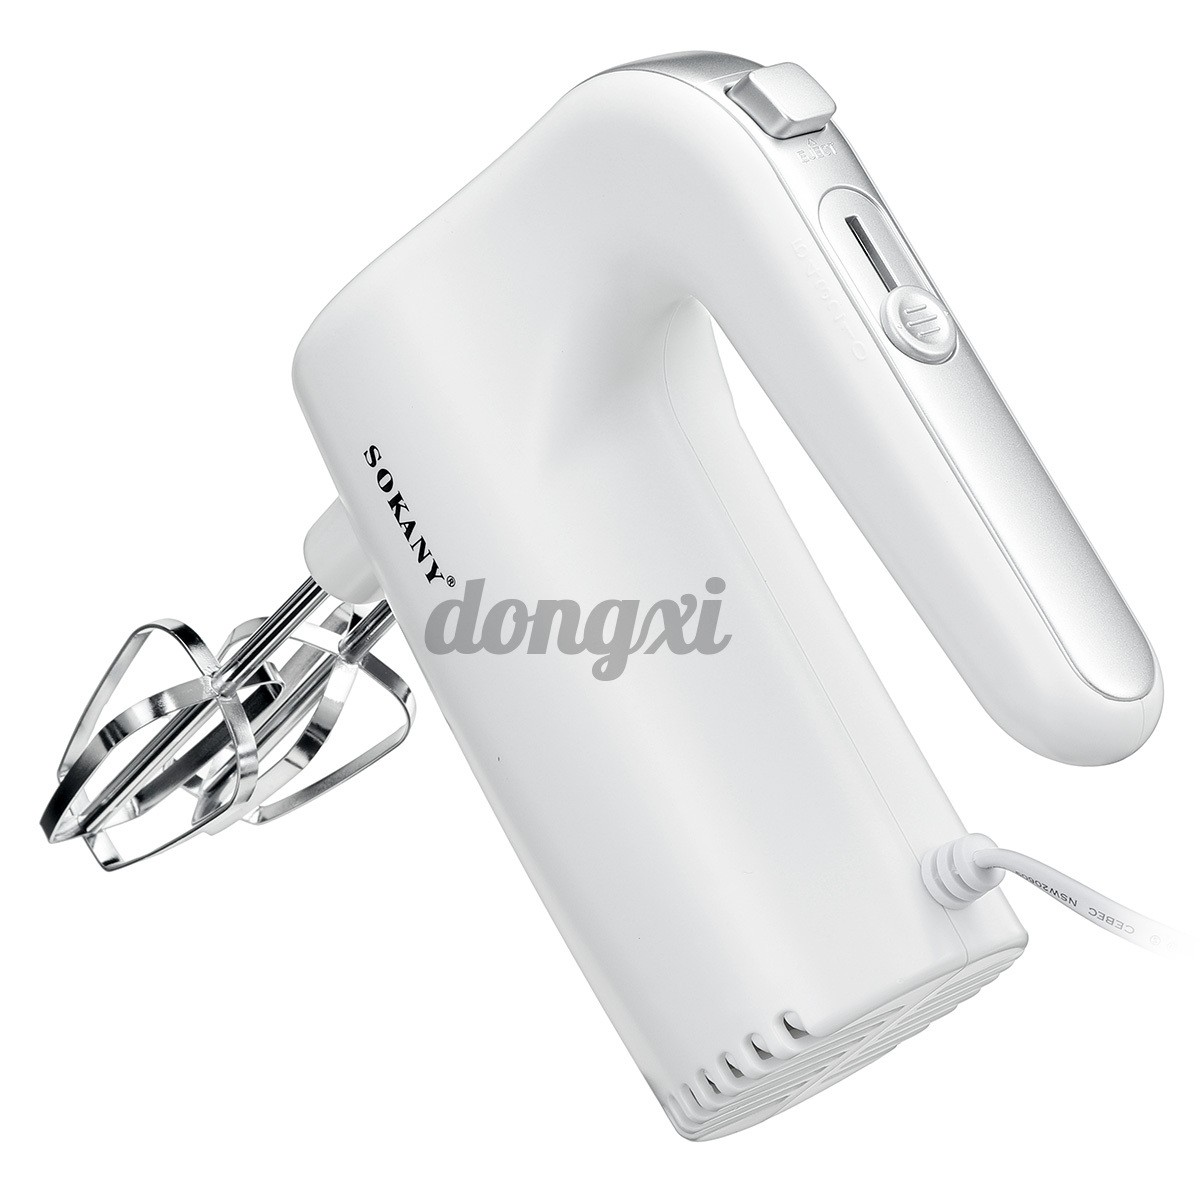 500w Electric Handheld Whisk 5 Speed Hand Mixer Kitchen Egg Beater Cream Cake Blender Whisk Electric Household Mixer Baking Small Cake Mixer Automatic Whisk Cream